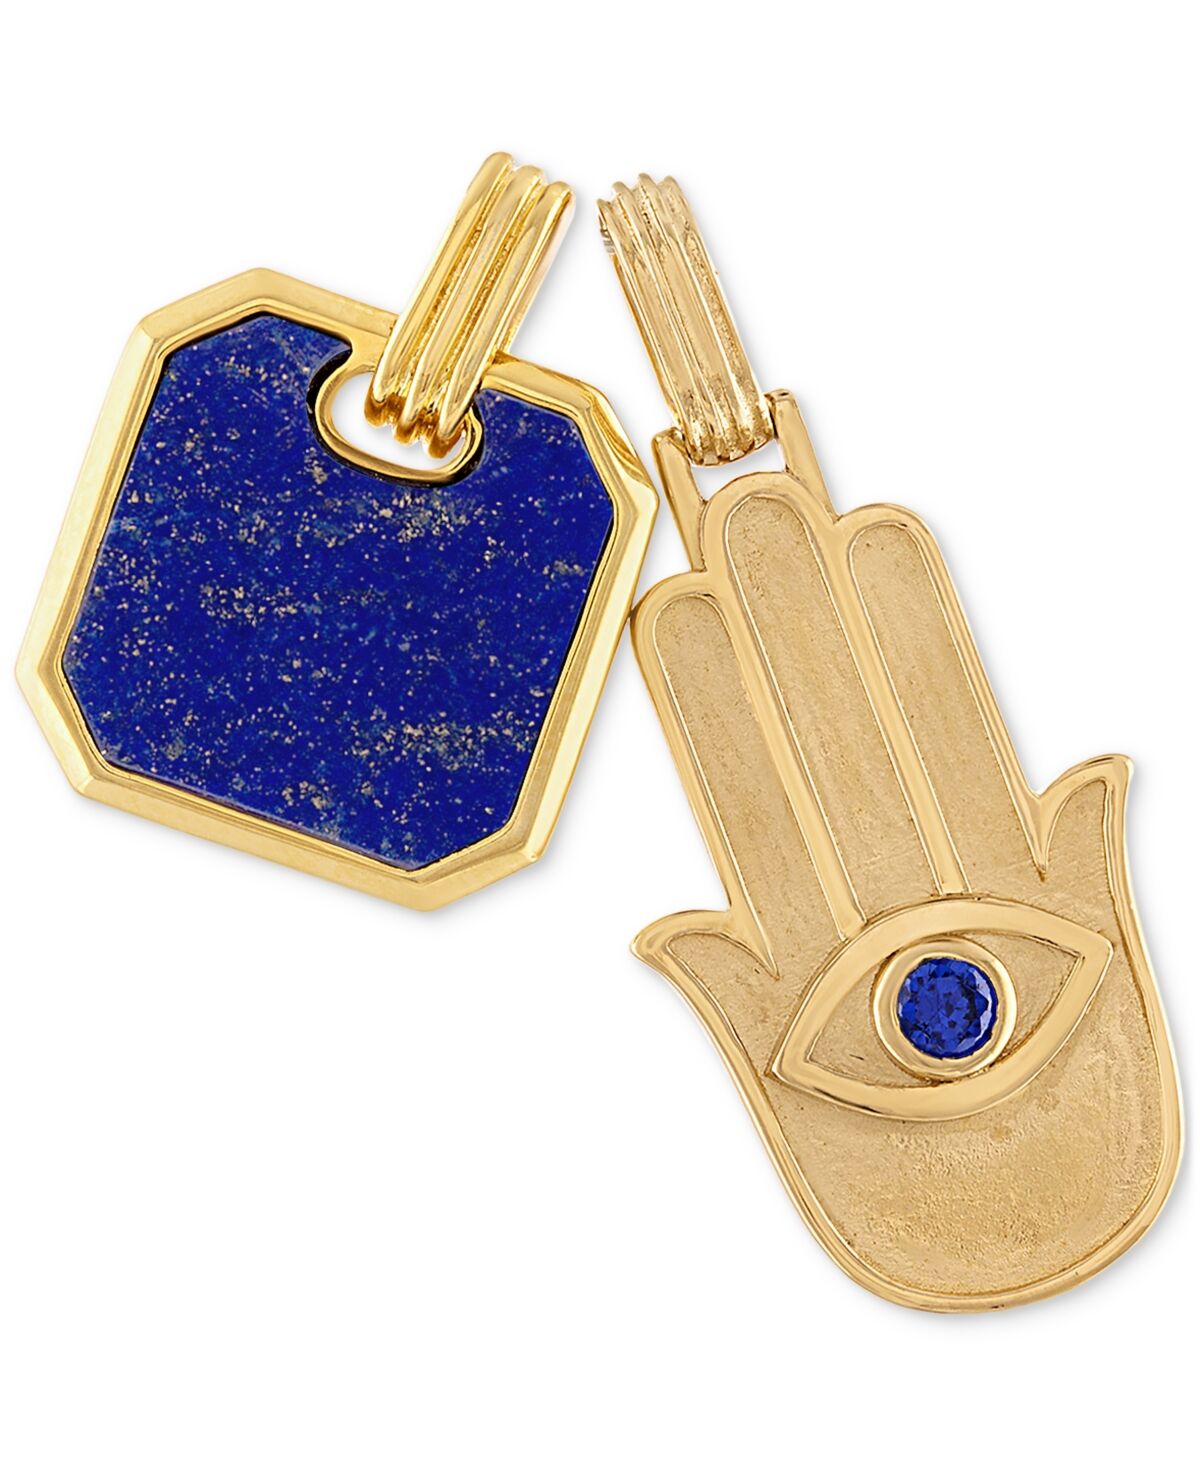 Esquire Men's Jewelry 2-Pc. Set Lapis Lazuli & Cubic Zirconia Dog Tag & Hamsa Hand Amulet Pendants in 14k Gold-Plated Sterling Silver, Created for Mac